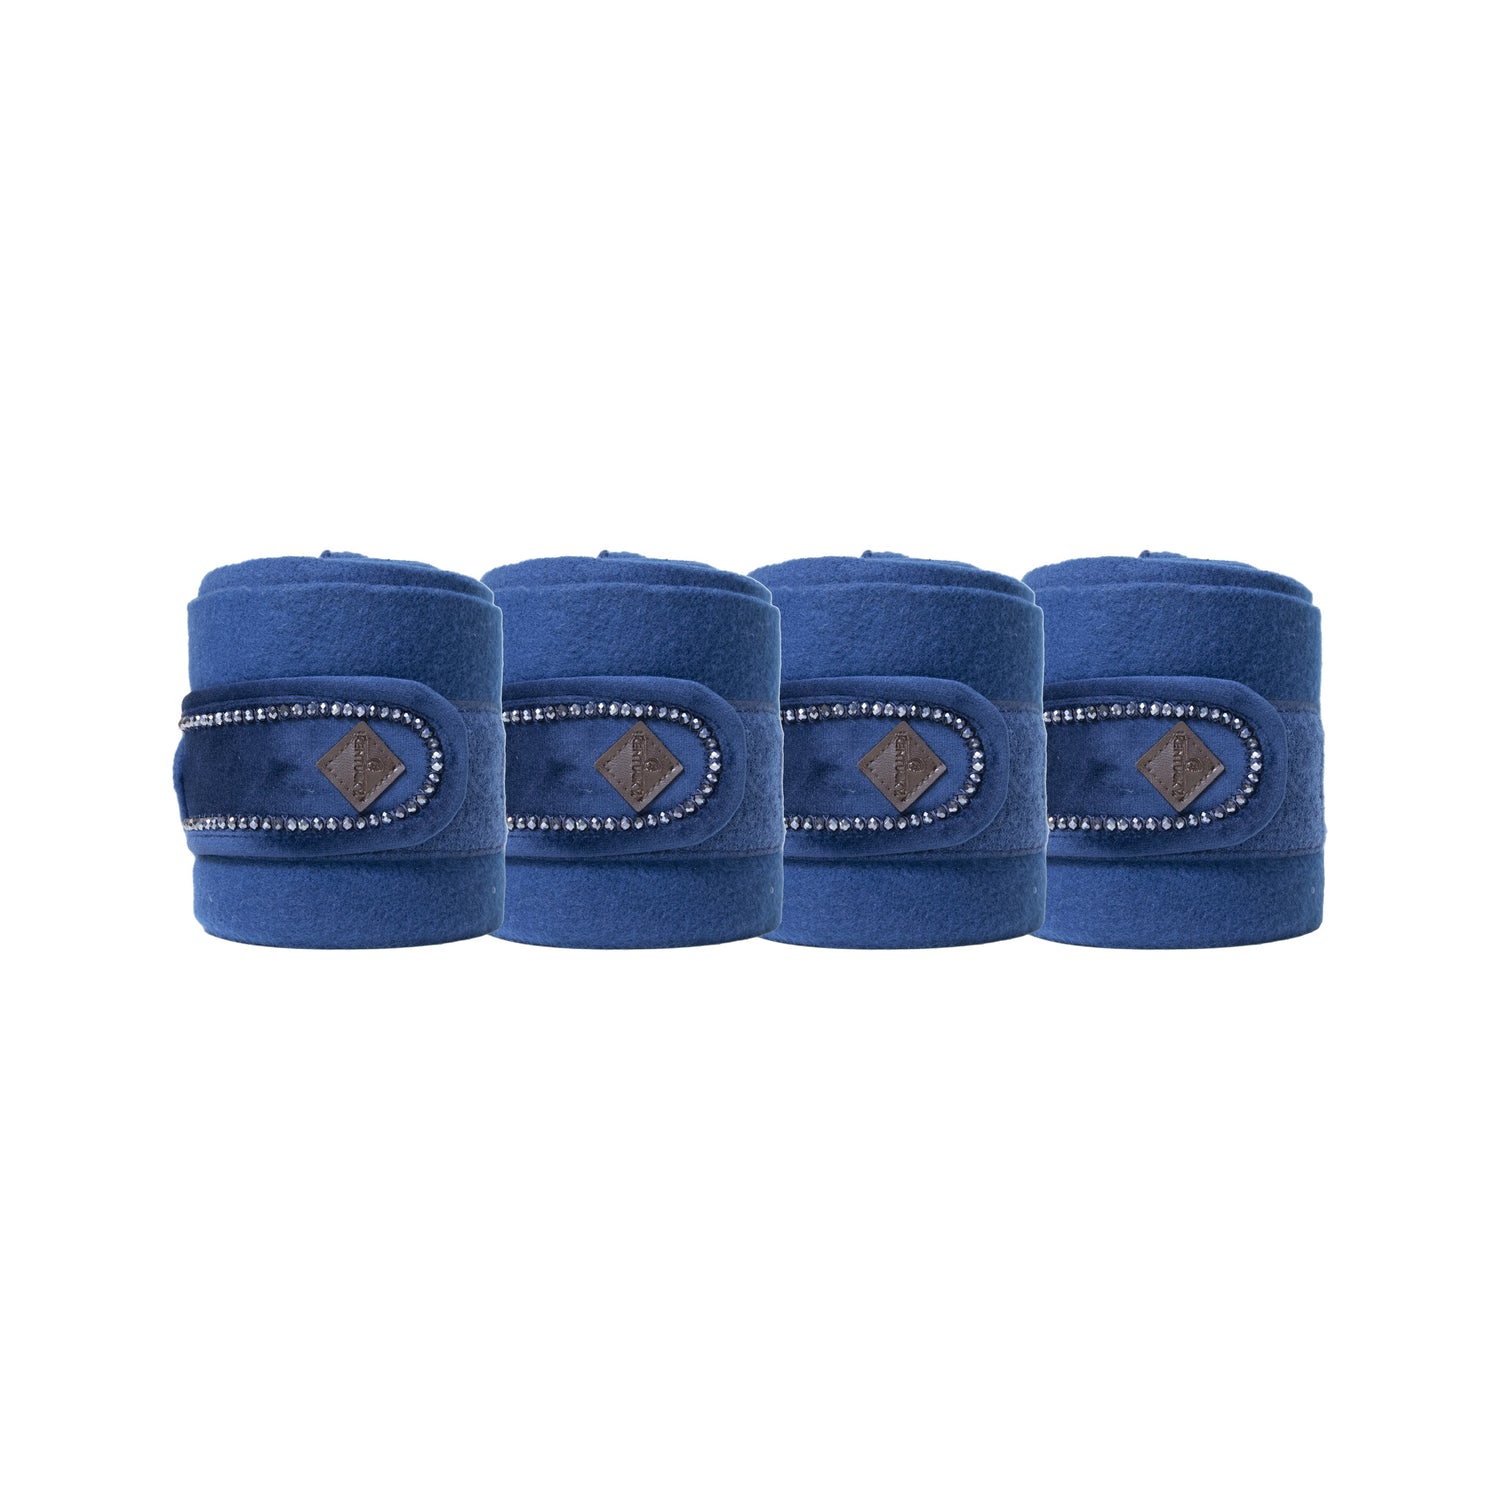 Train in style with the Kentucky Polar Fleece velvet bandages pearls.  The Pearl model will attract all eyes. Ideal for daily work, providing optimal support to the tendons during exercise.